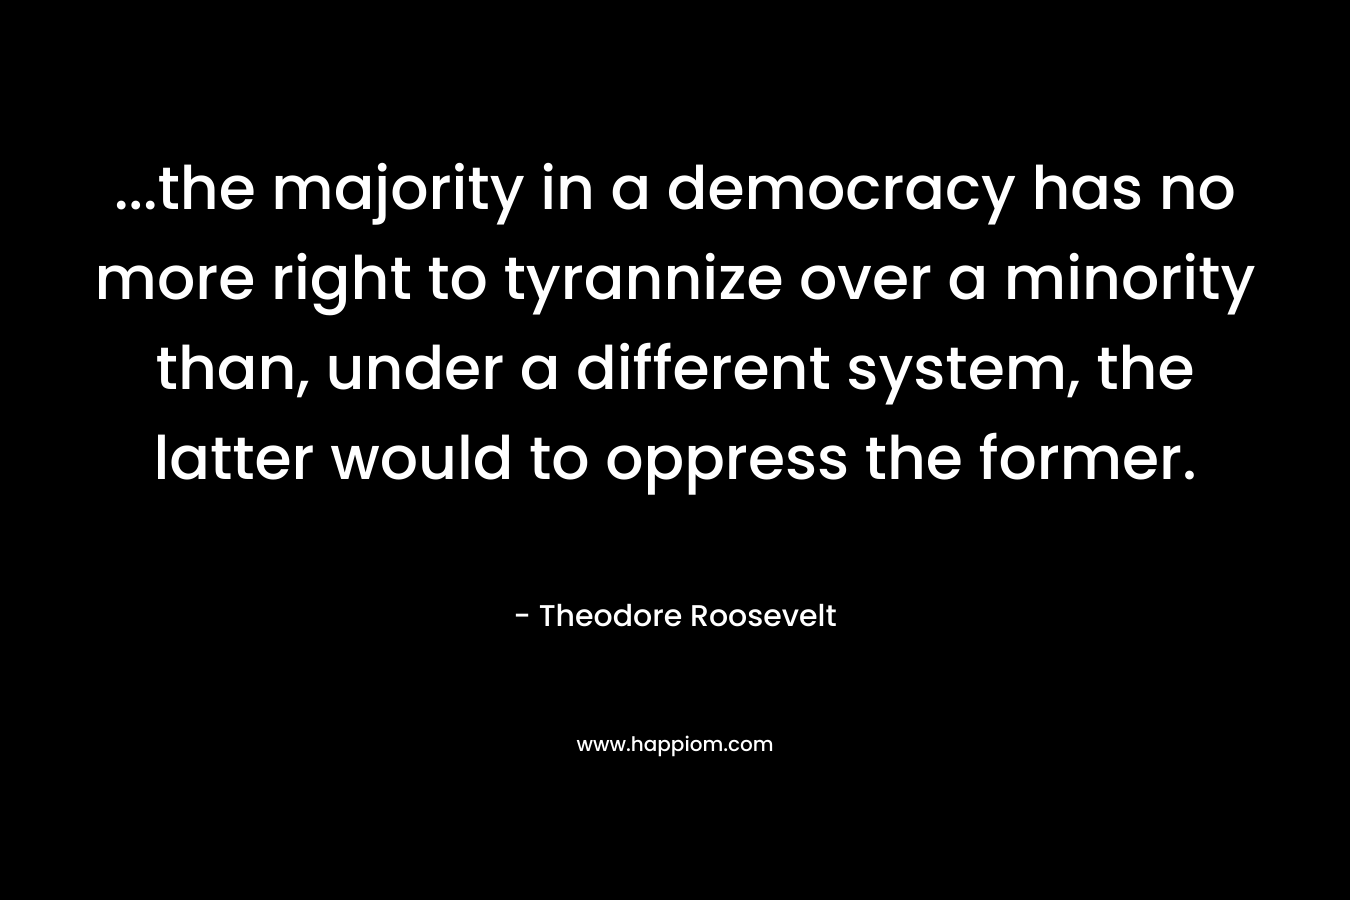 …the majority in a democracy has no more right to tyrannize over a minority than, under a different system, the latter would to oppress the former. – Theodore Roosevelt